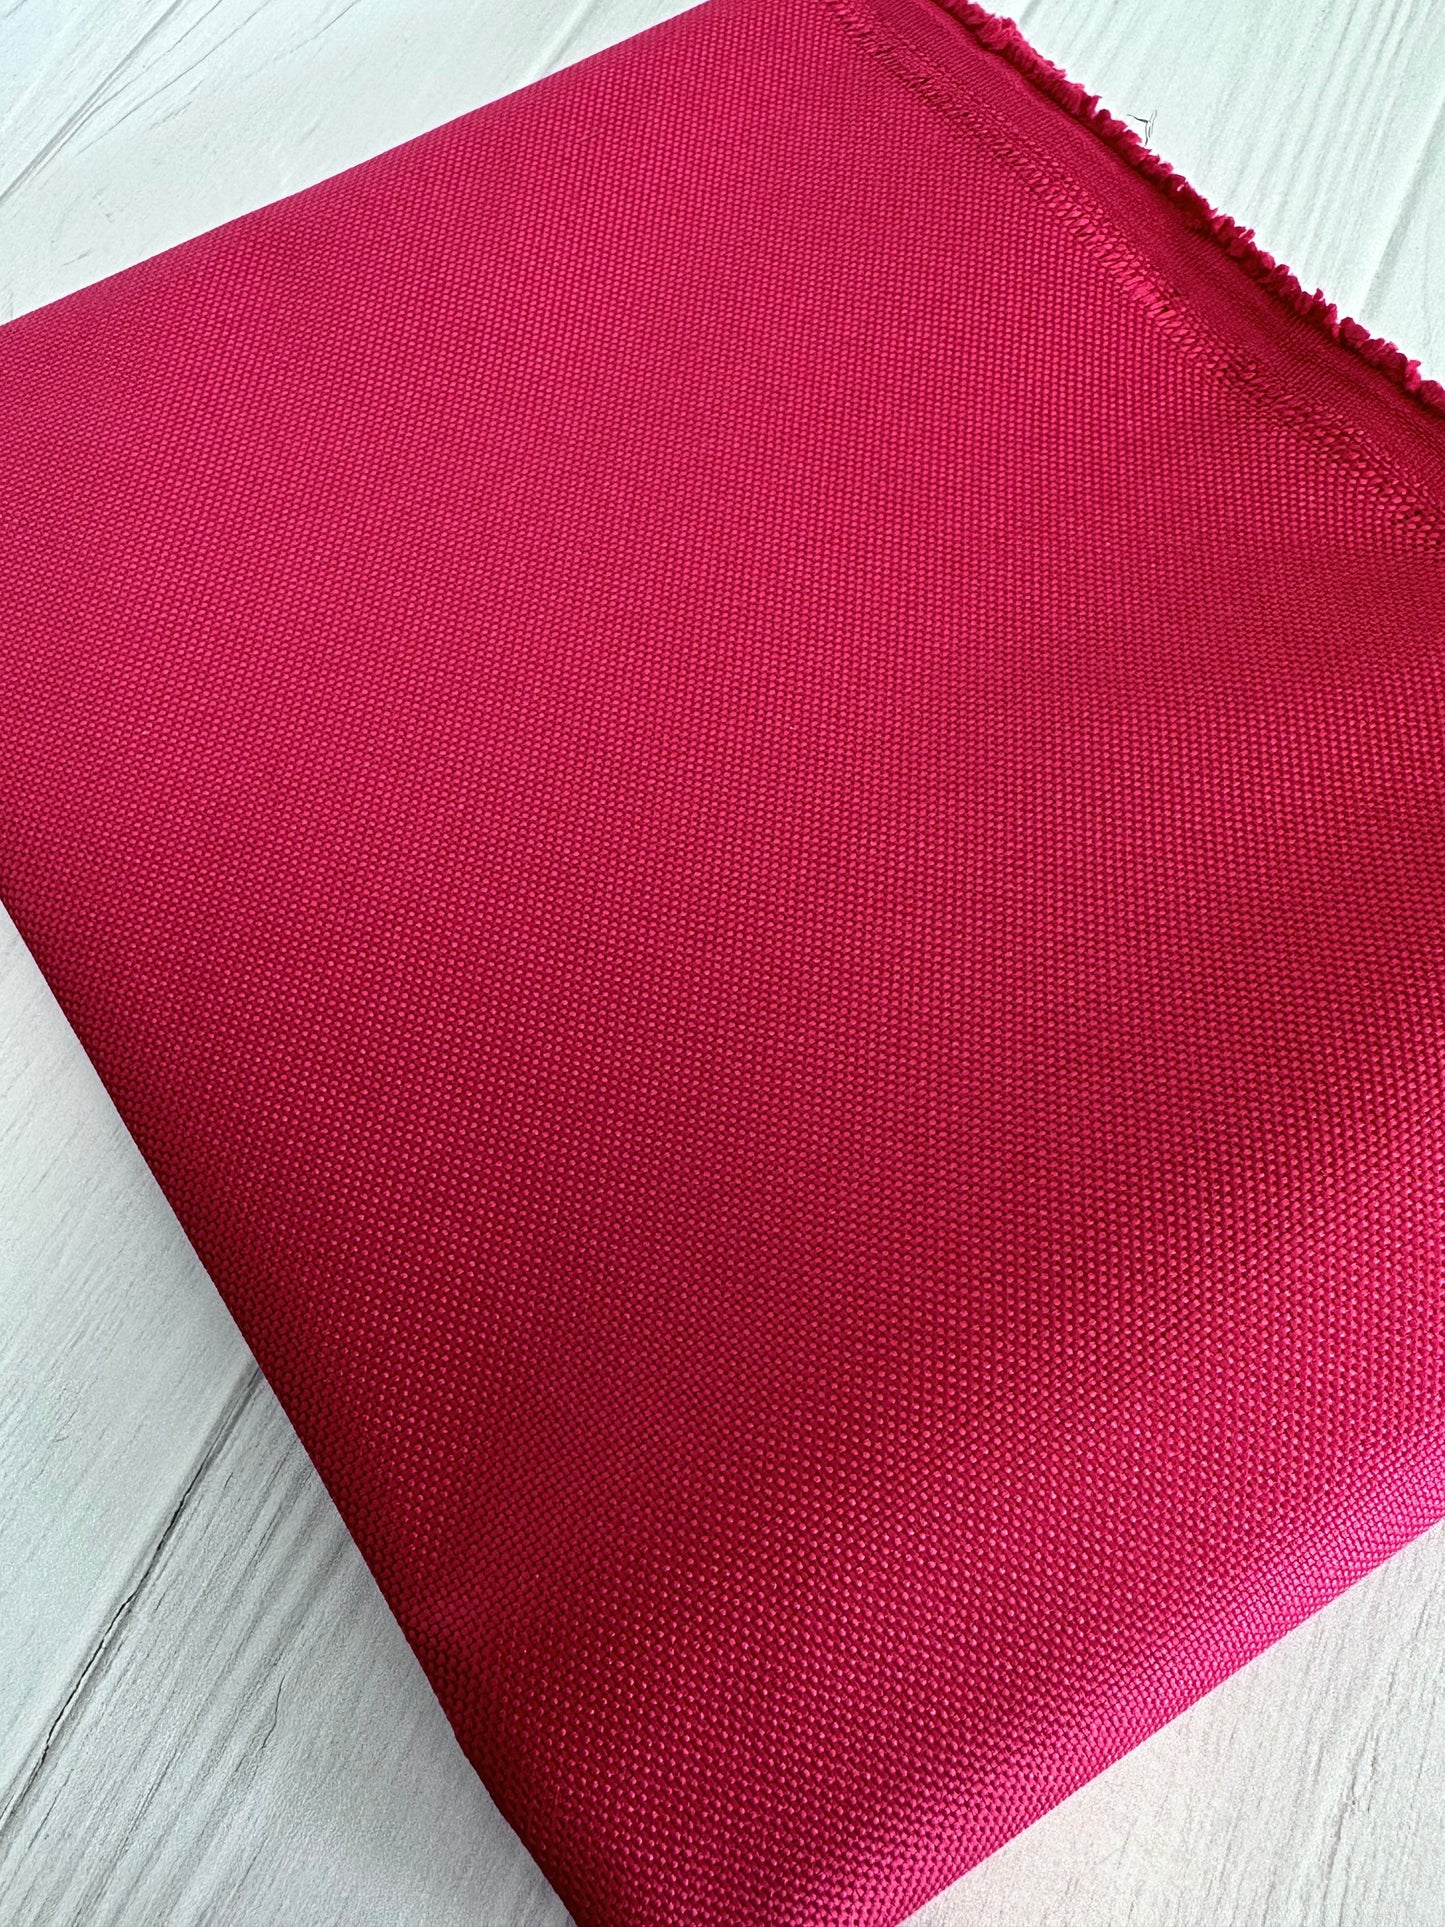 Pomegranate Water Resistant Canvas